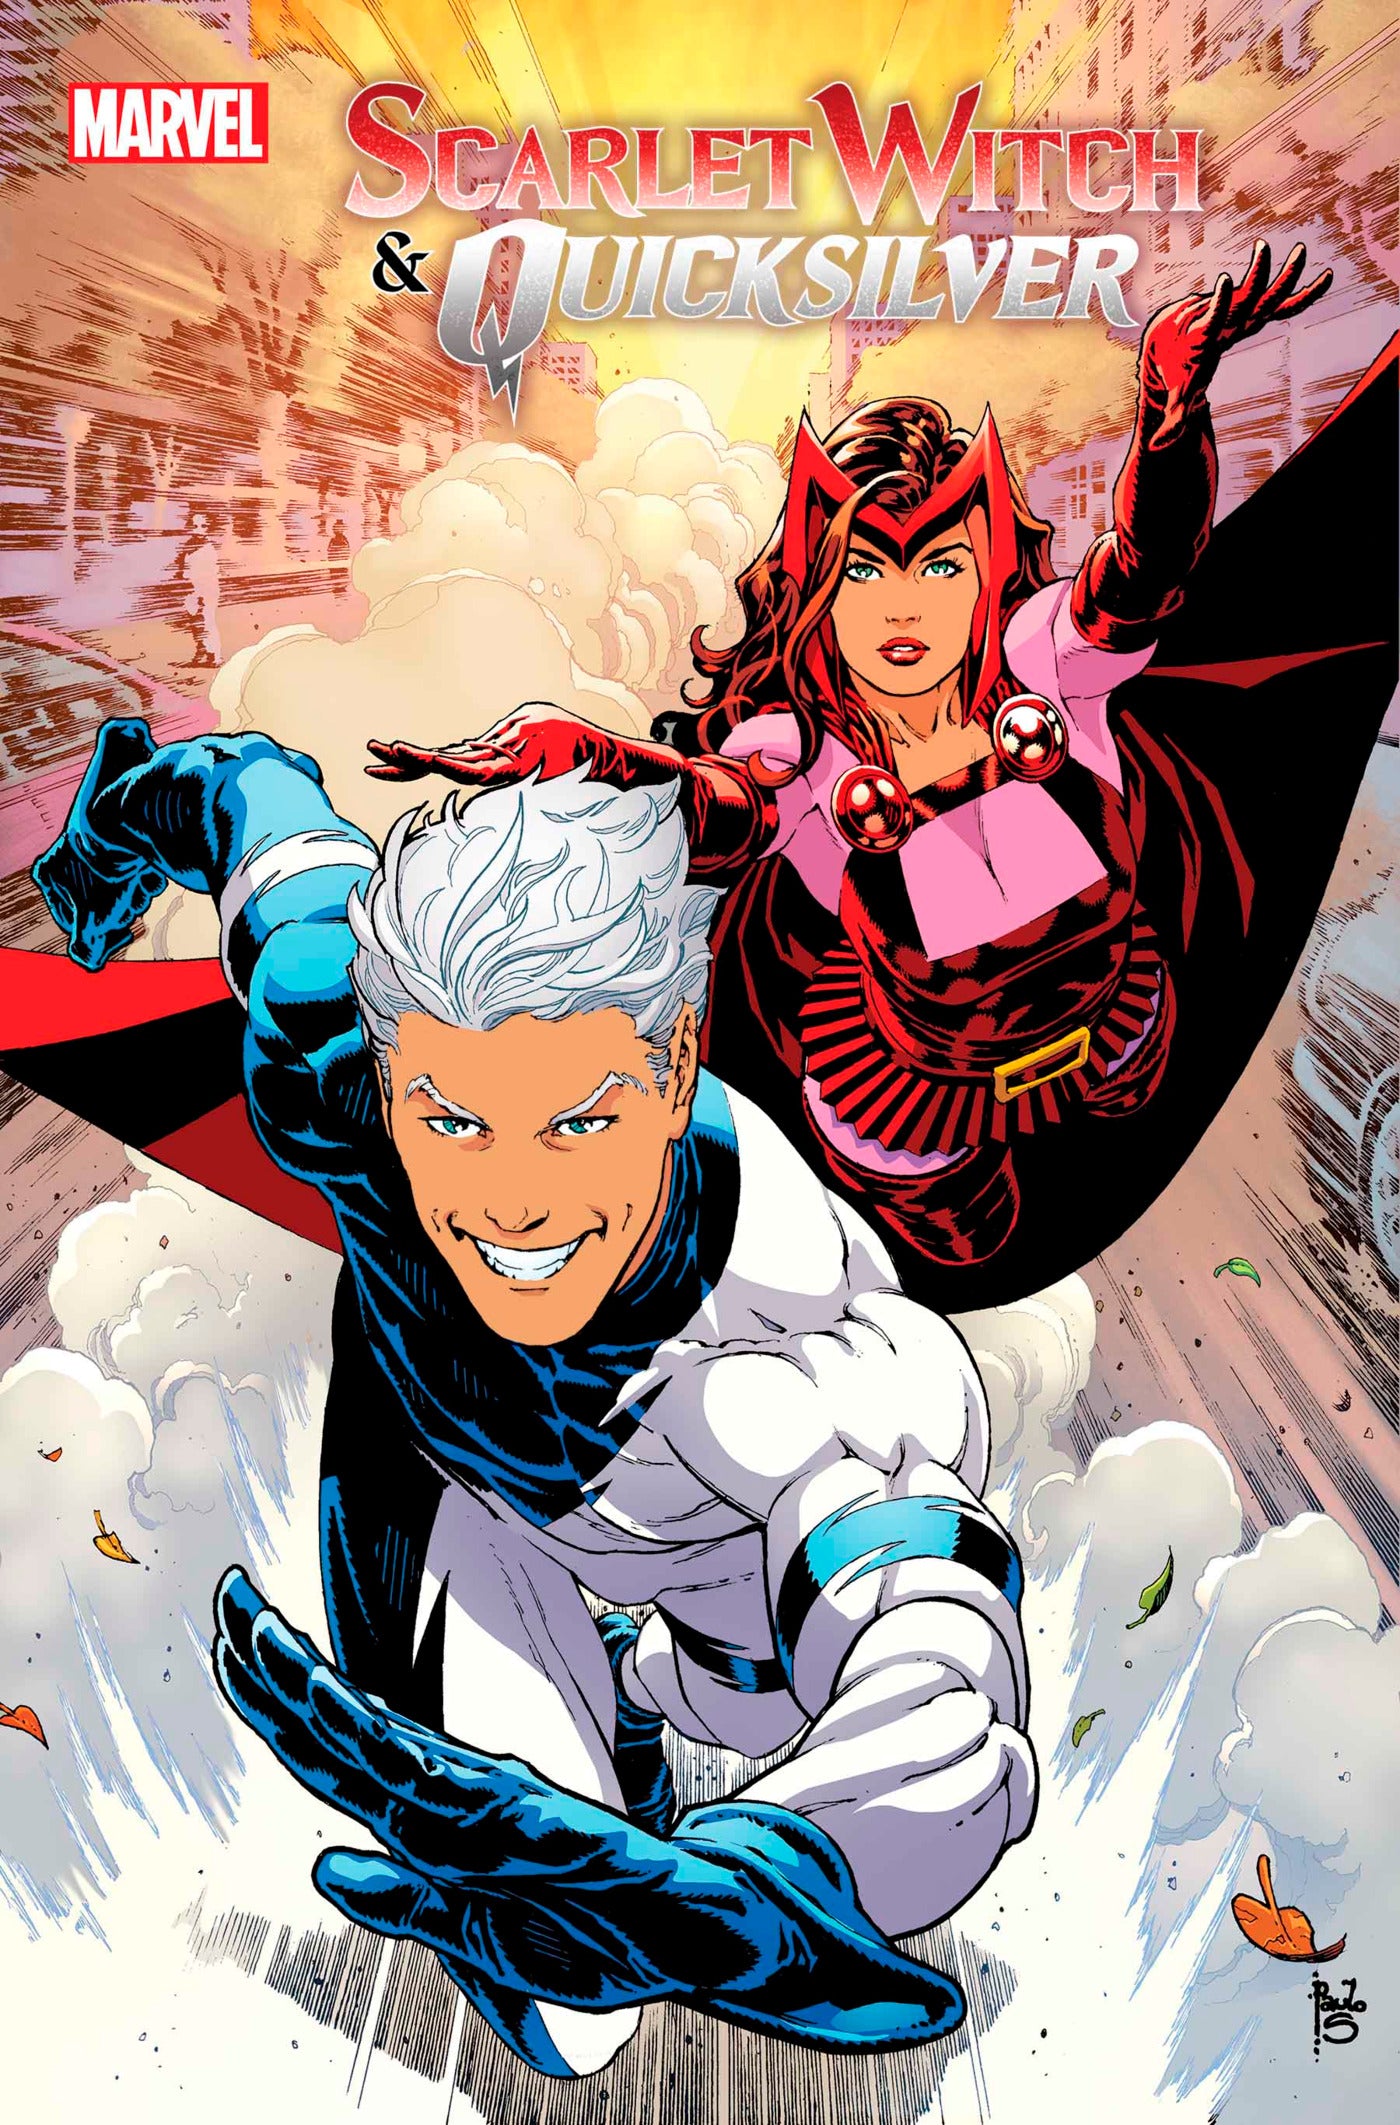 Quicksilver and Scarlet Witch move to Alabama